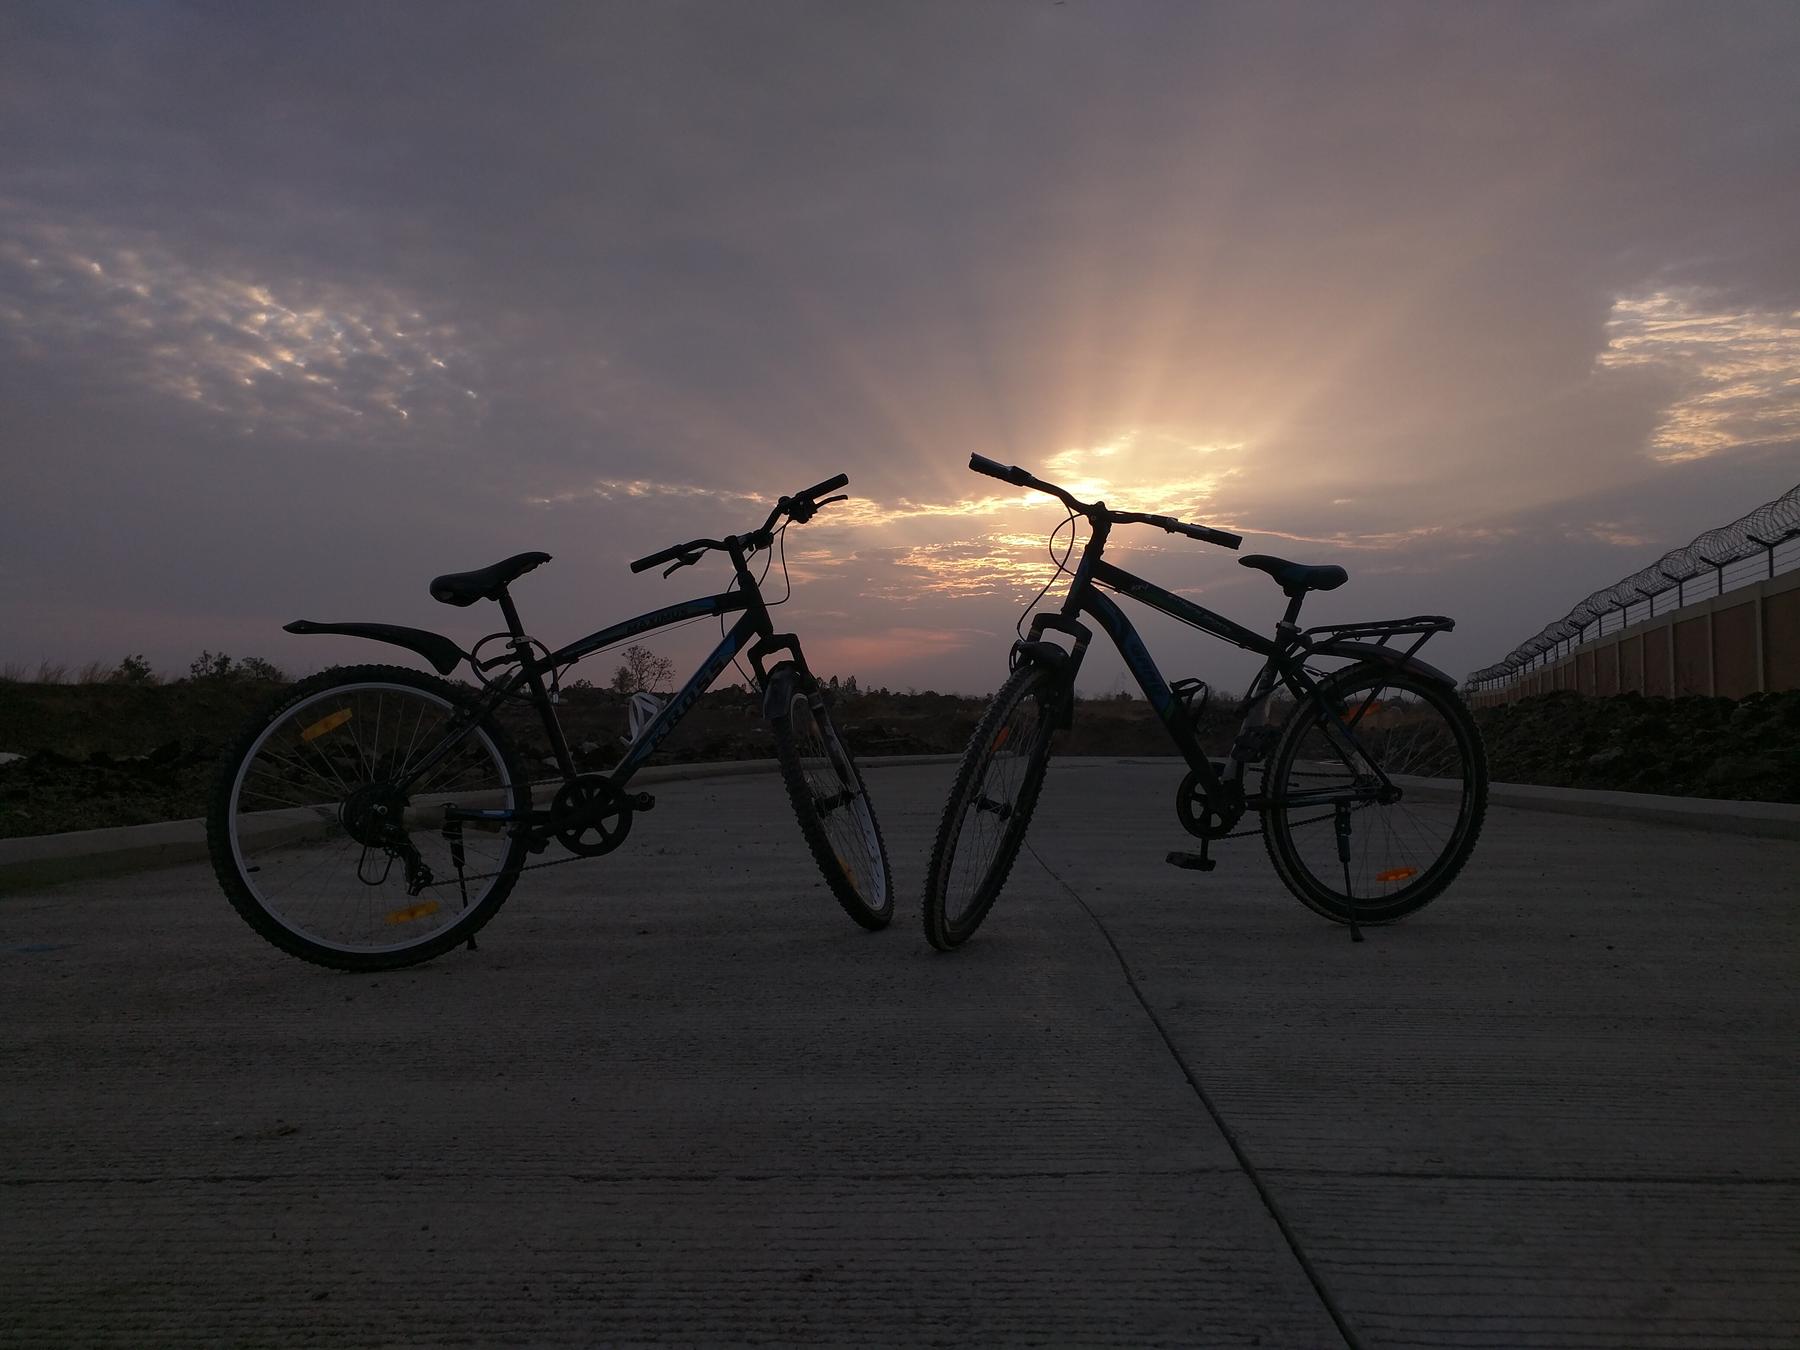 File:Sunrise 07.jpg - two bikes parked in front of a sunset